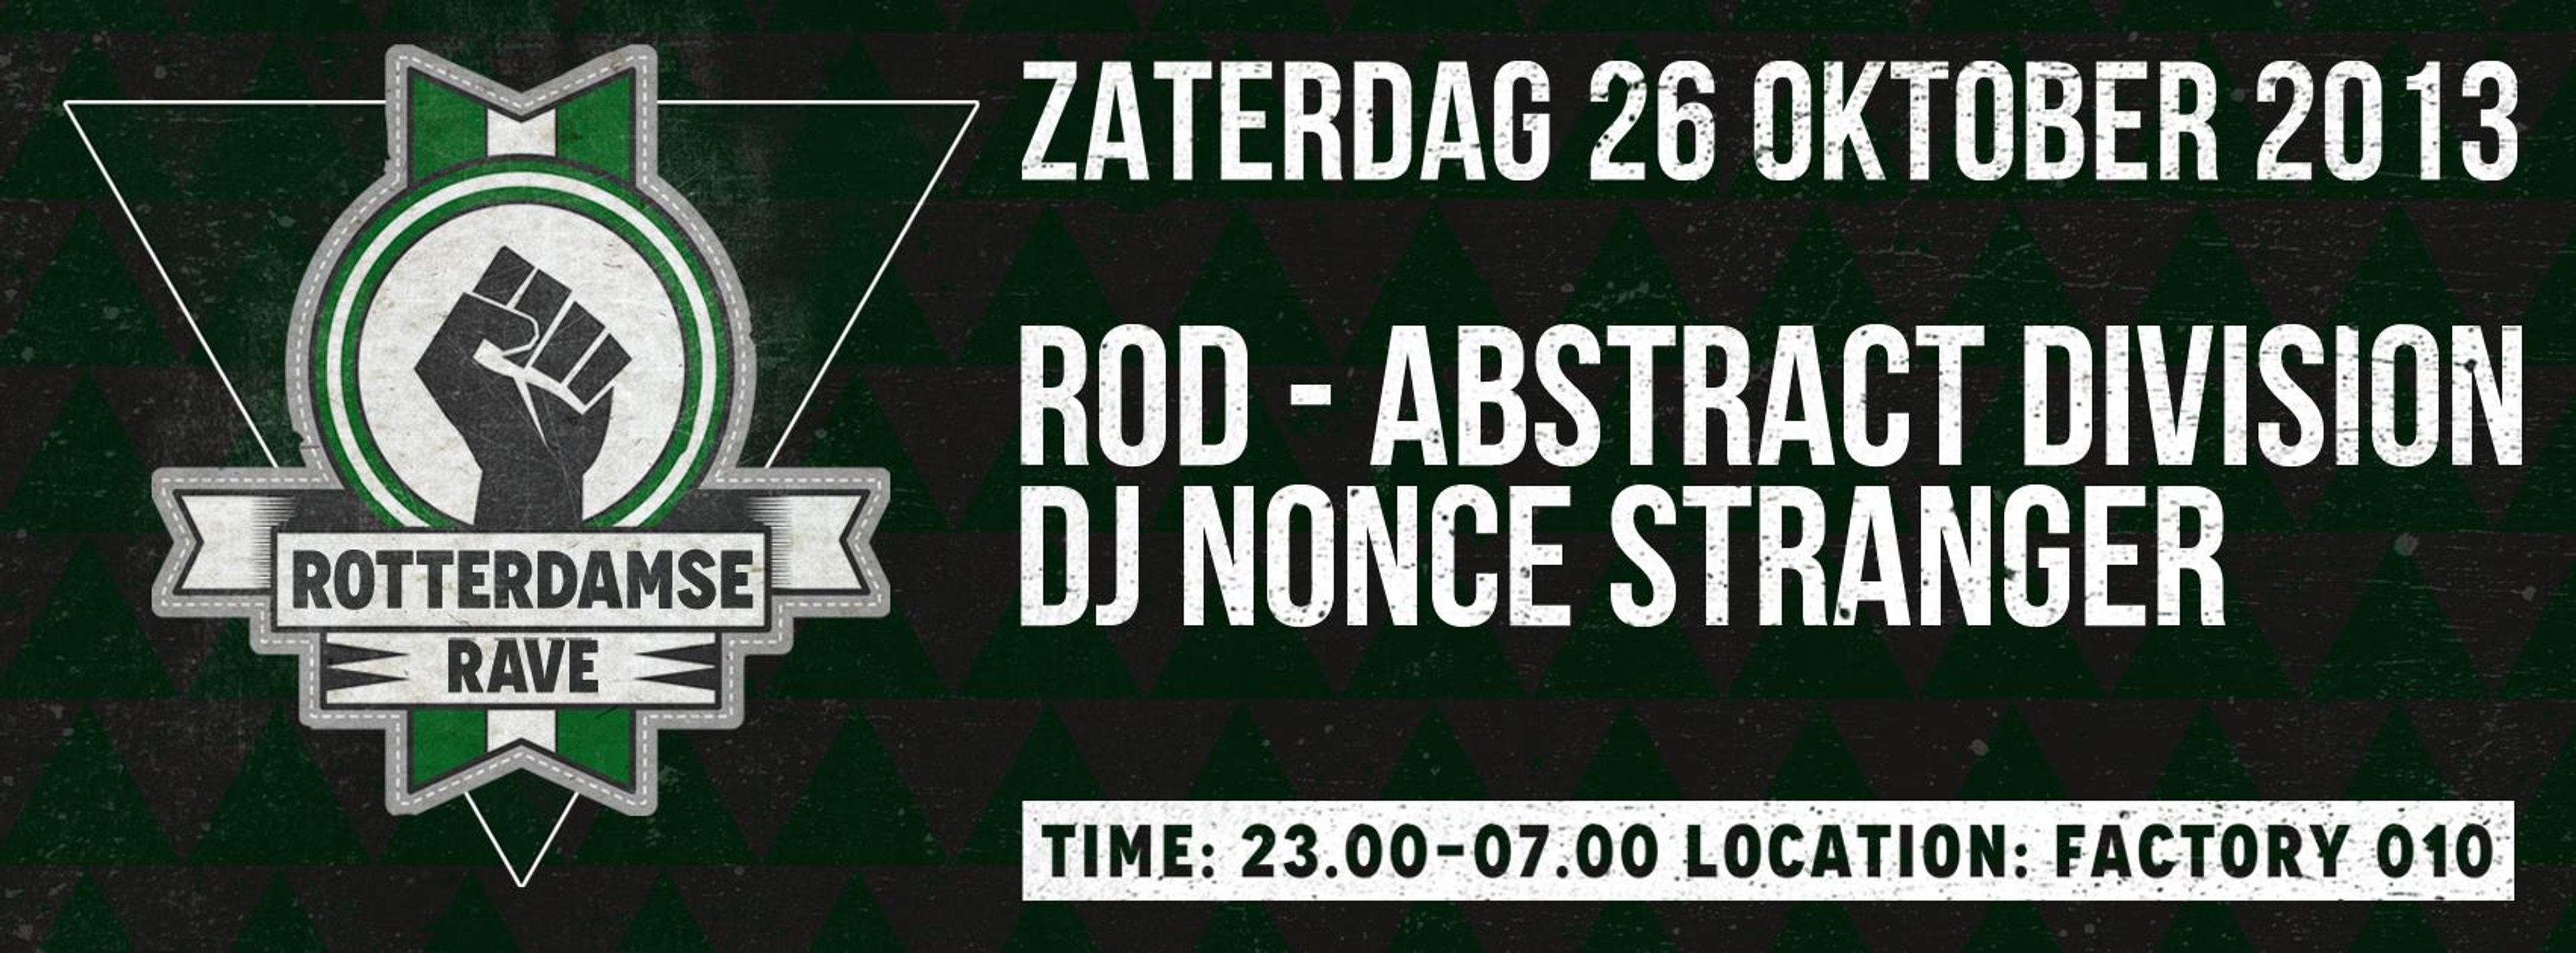 Rotterdamse Rave w/ ROD & Abstract Division